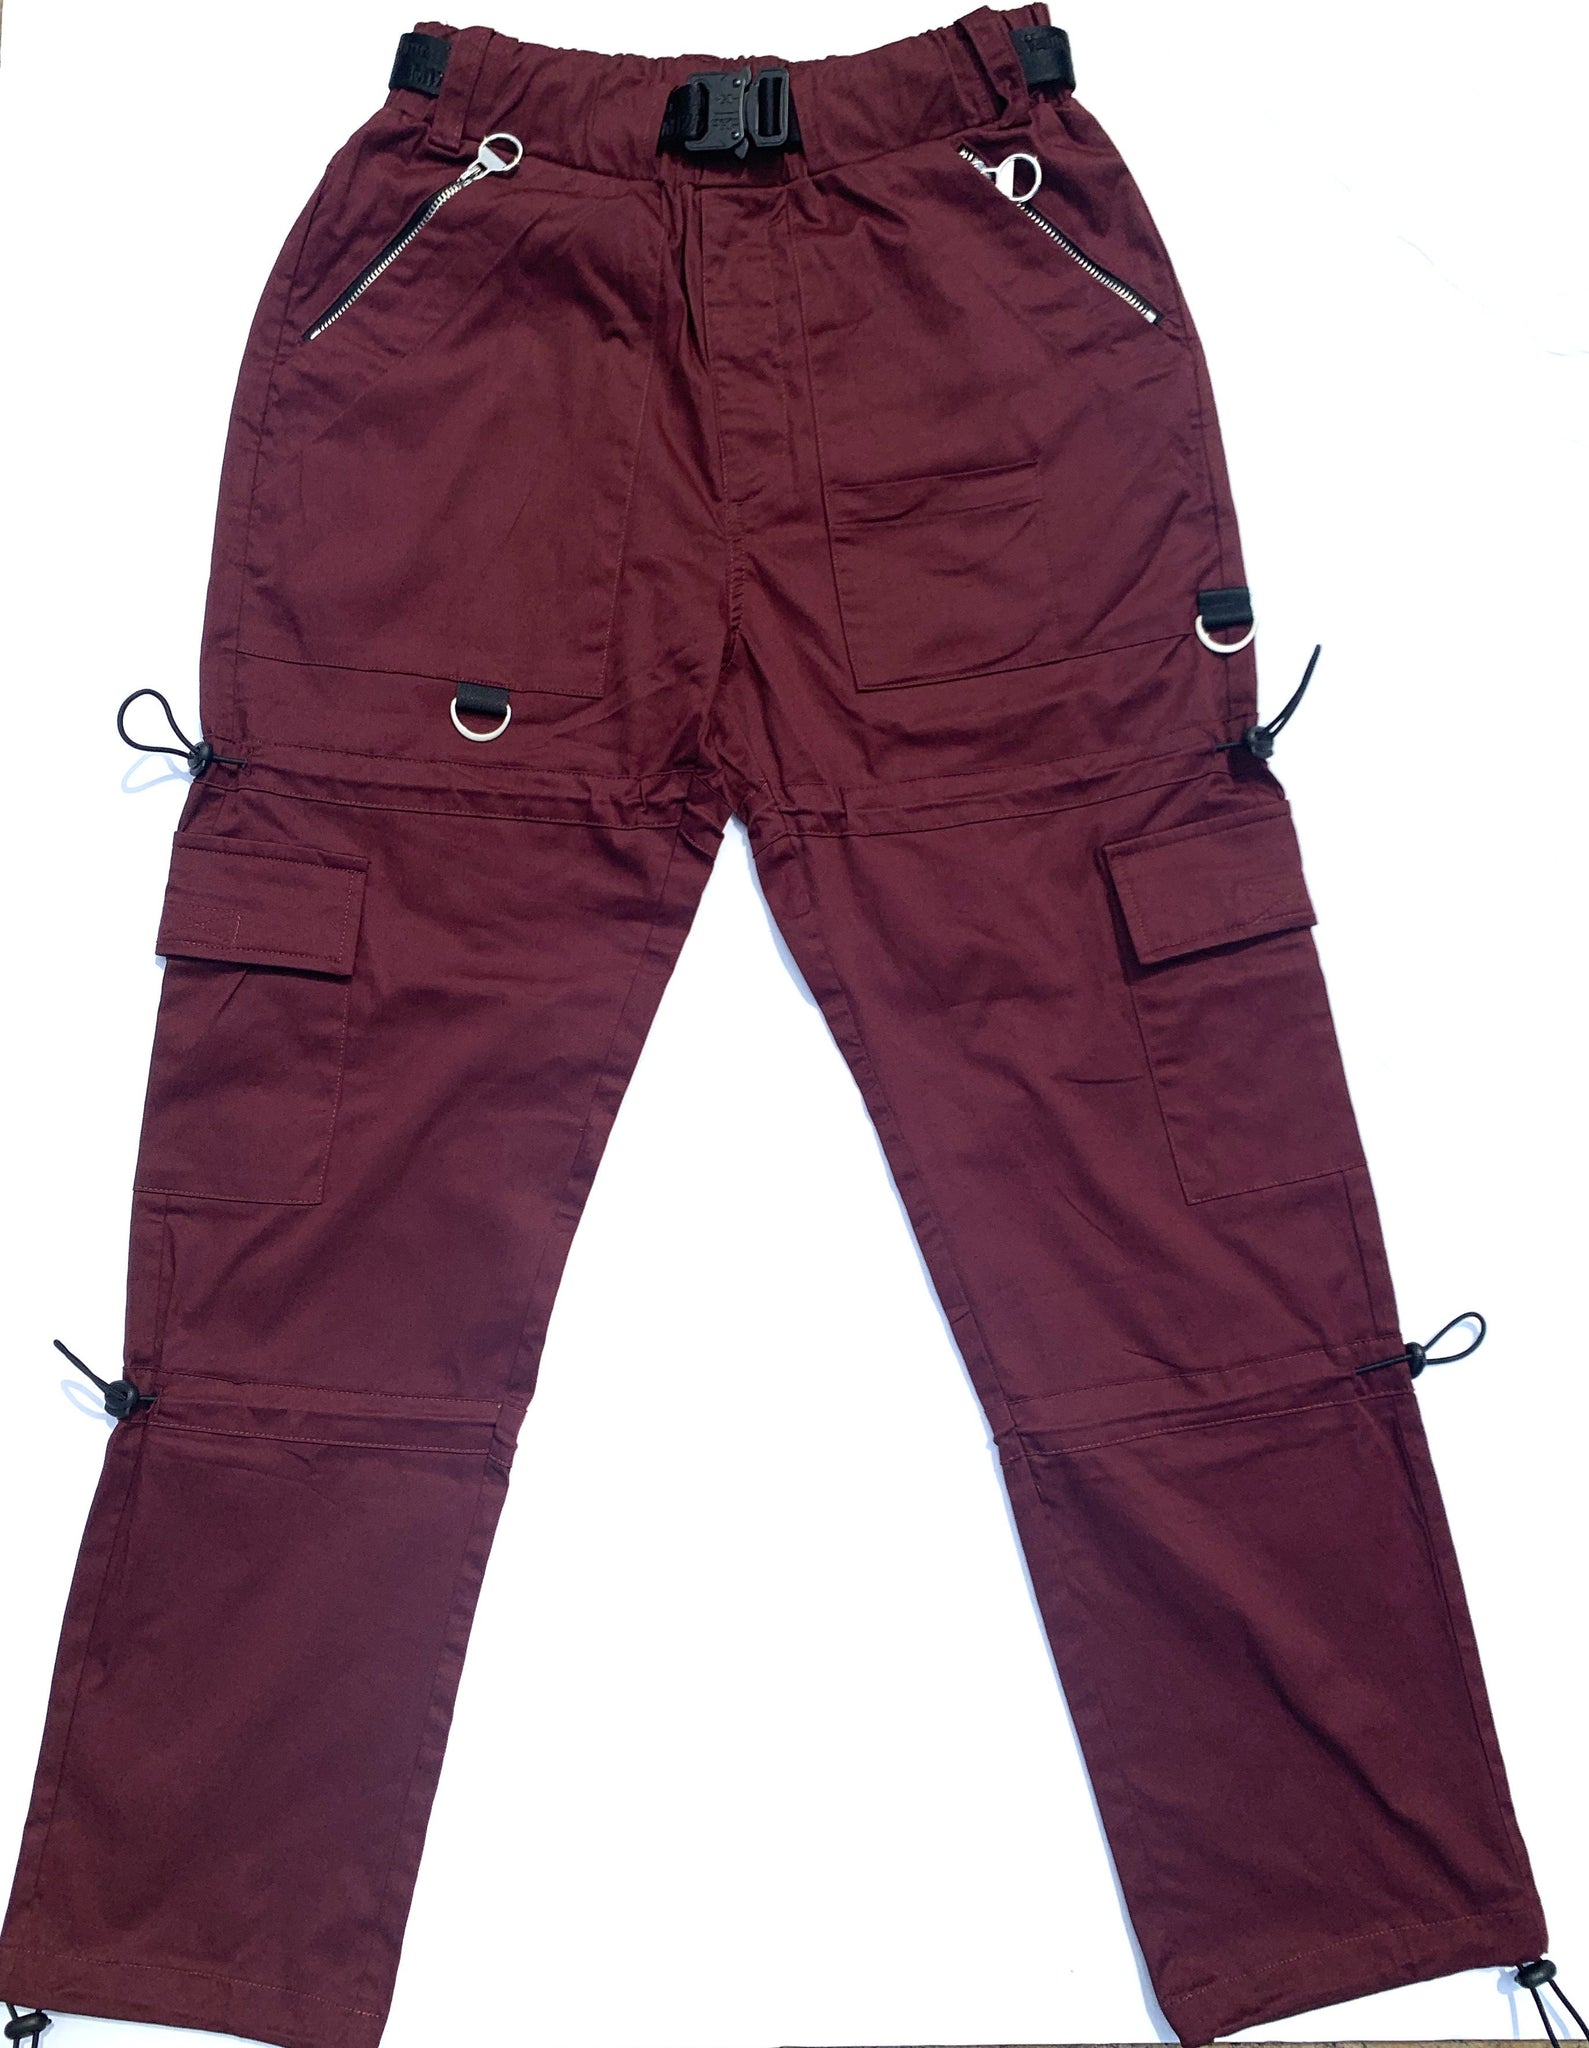 Campus Sutra Men's Maroon Cuffed Hem Cargo Trousers - Campussutra